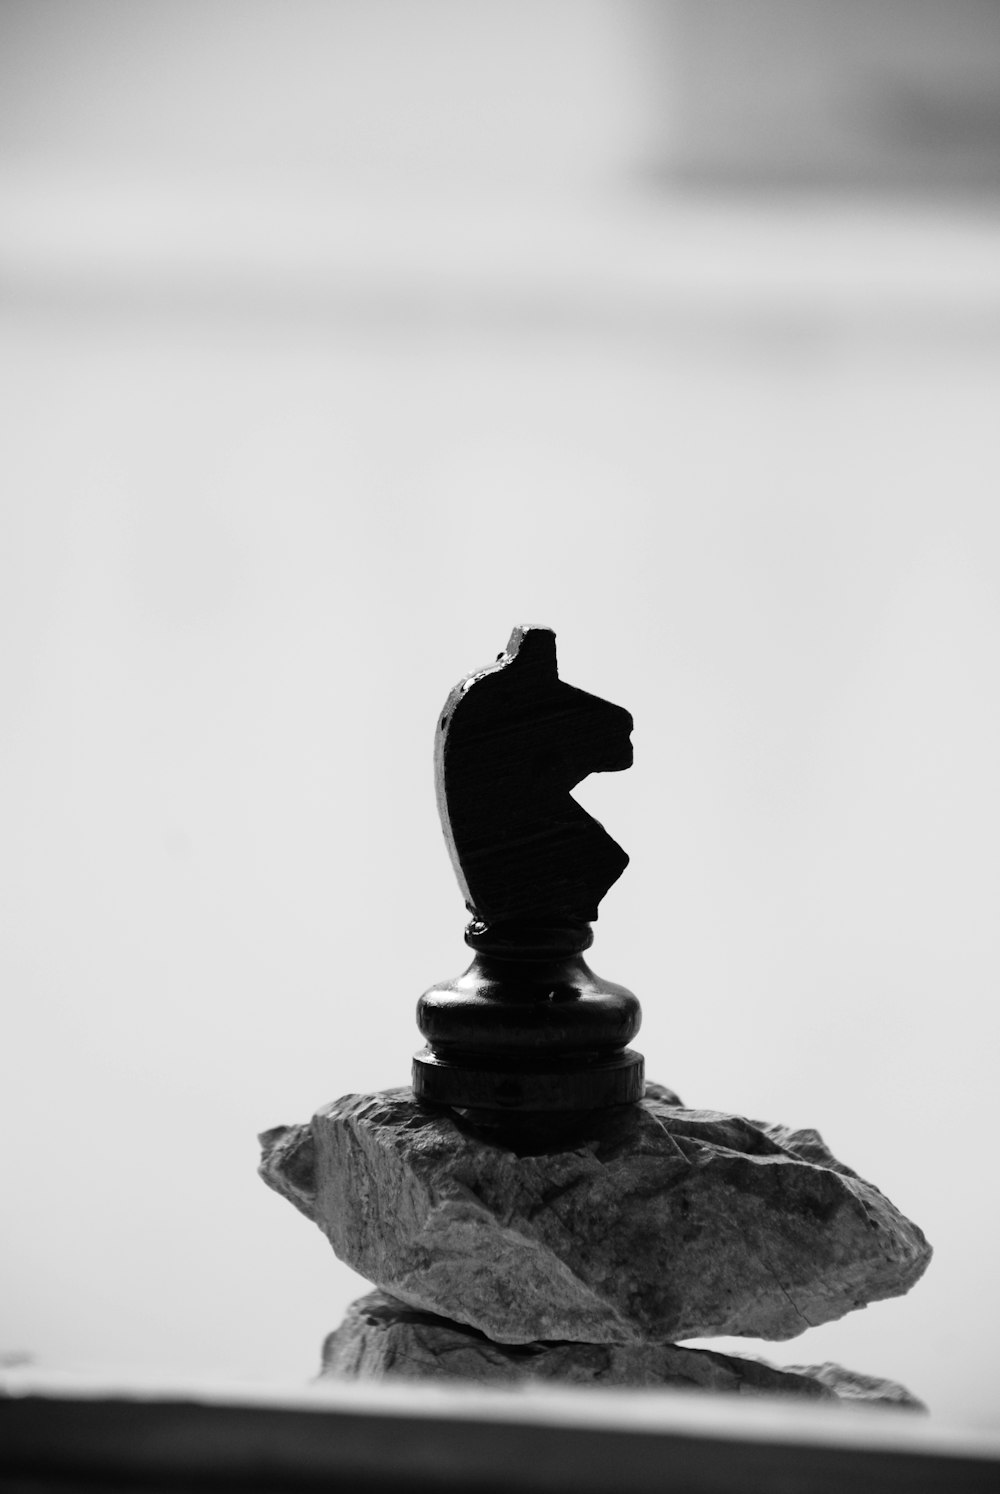 grayscale photography of knight chess